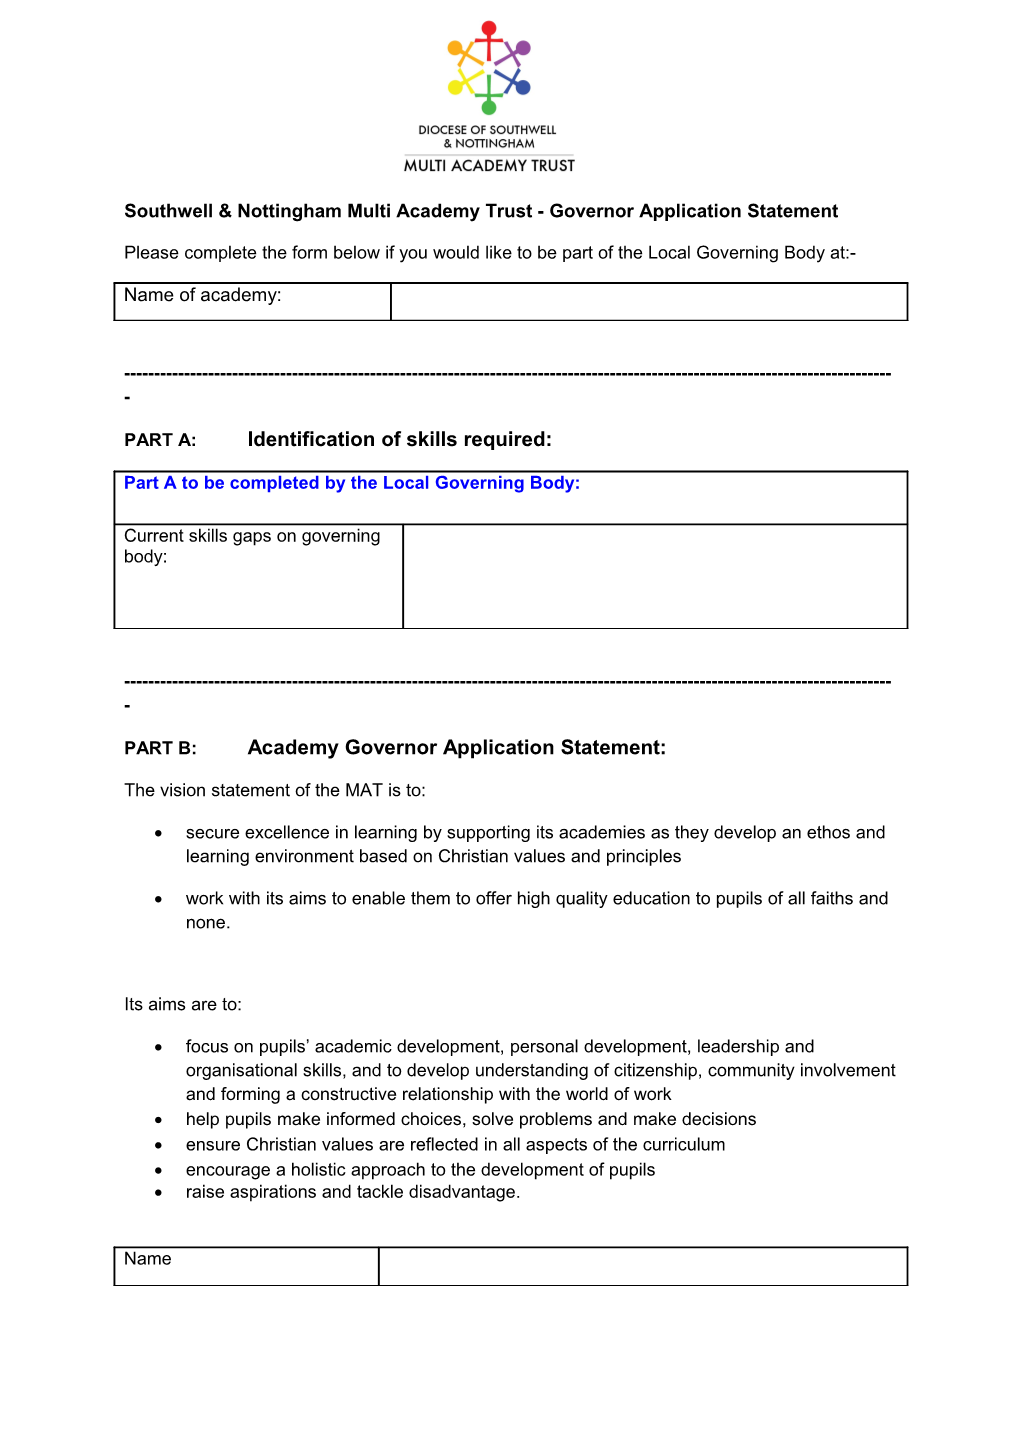 Southwell & Nottingham Multi Academy Trust - Governor Application Statement